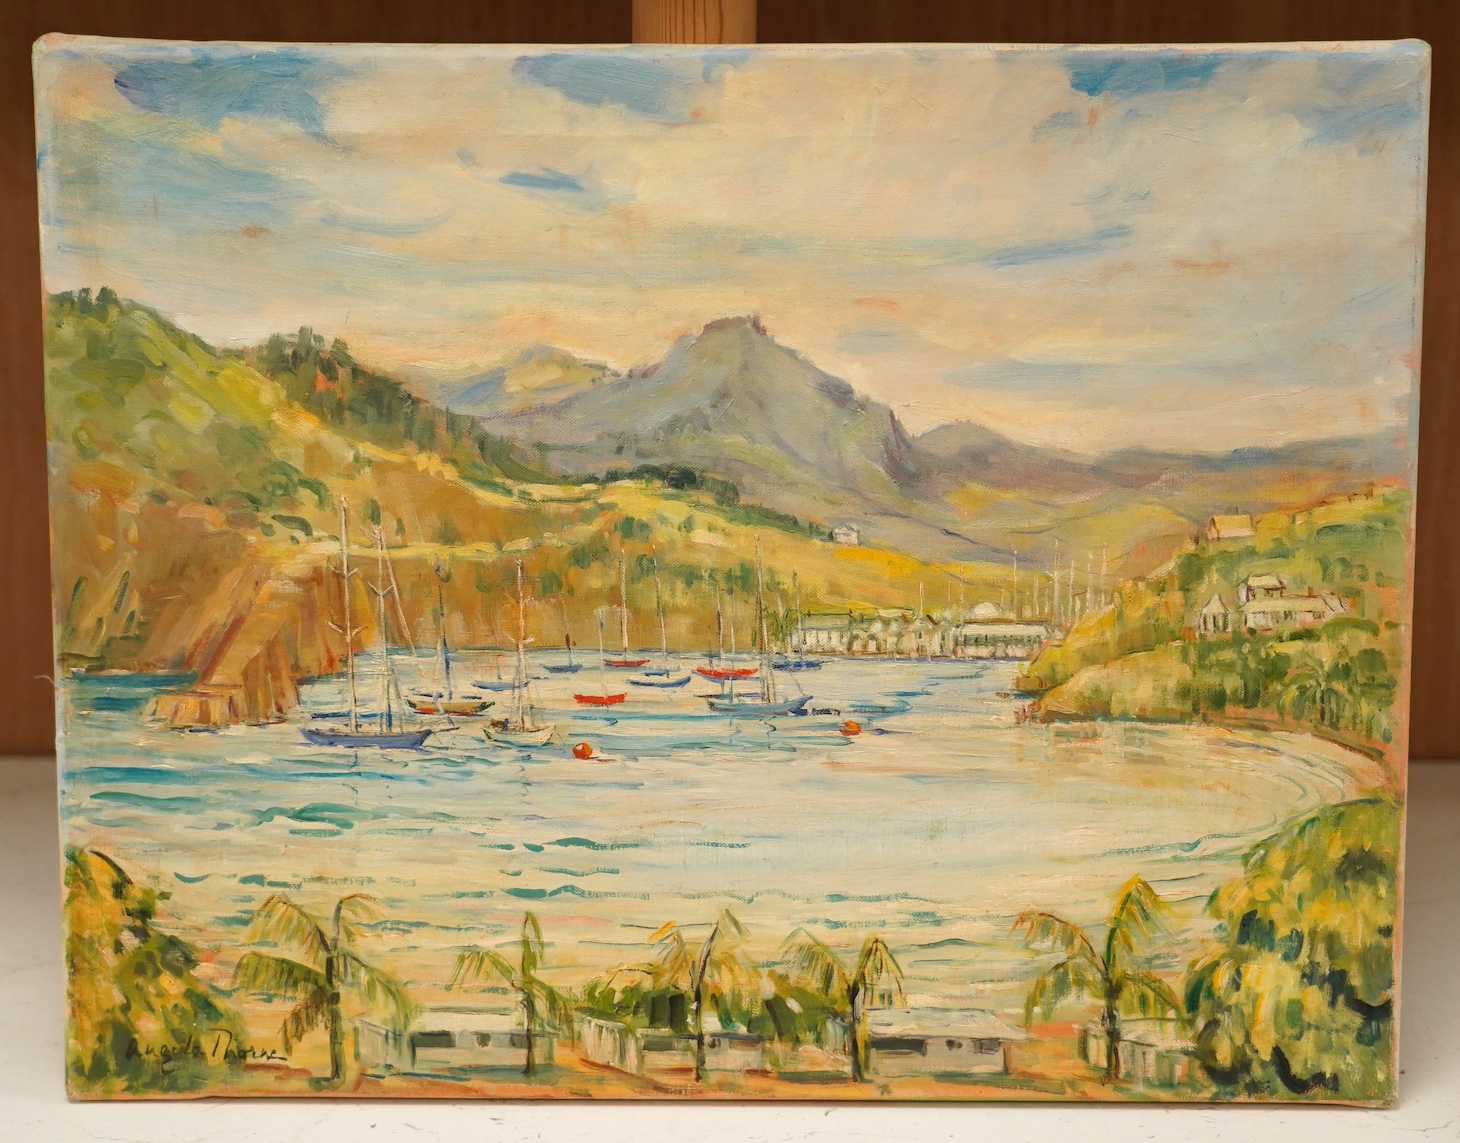 Angela Thorne (b.1911), oil on canvas, Bay with fishing boats, possibly the West Indies, signed, 35 x 45cm, unframed. Condition - fair to good, some surface dirt